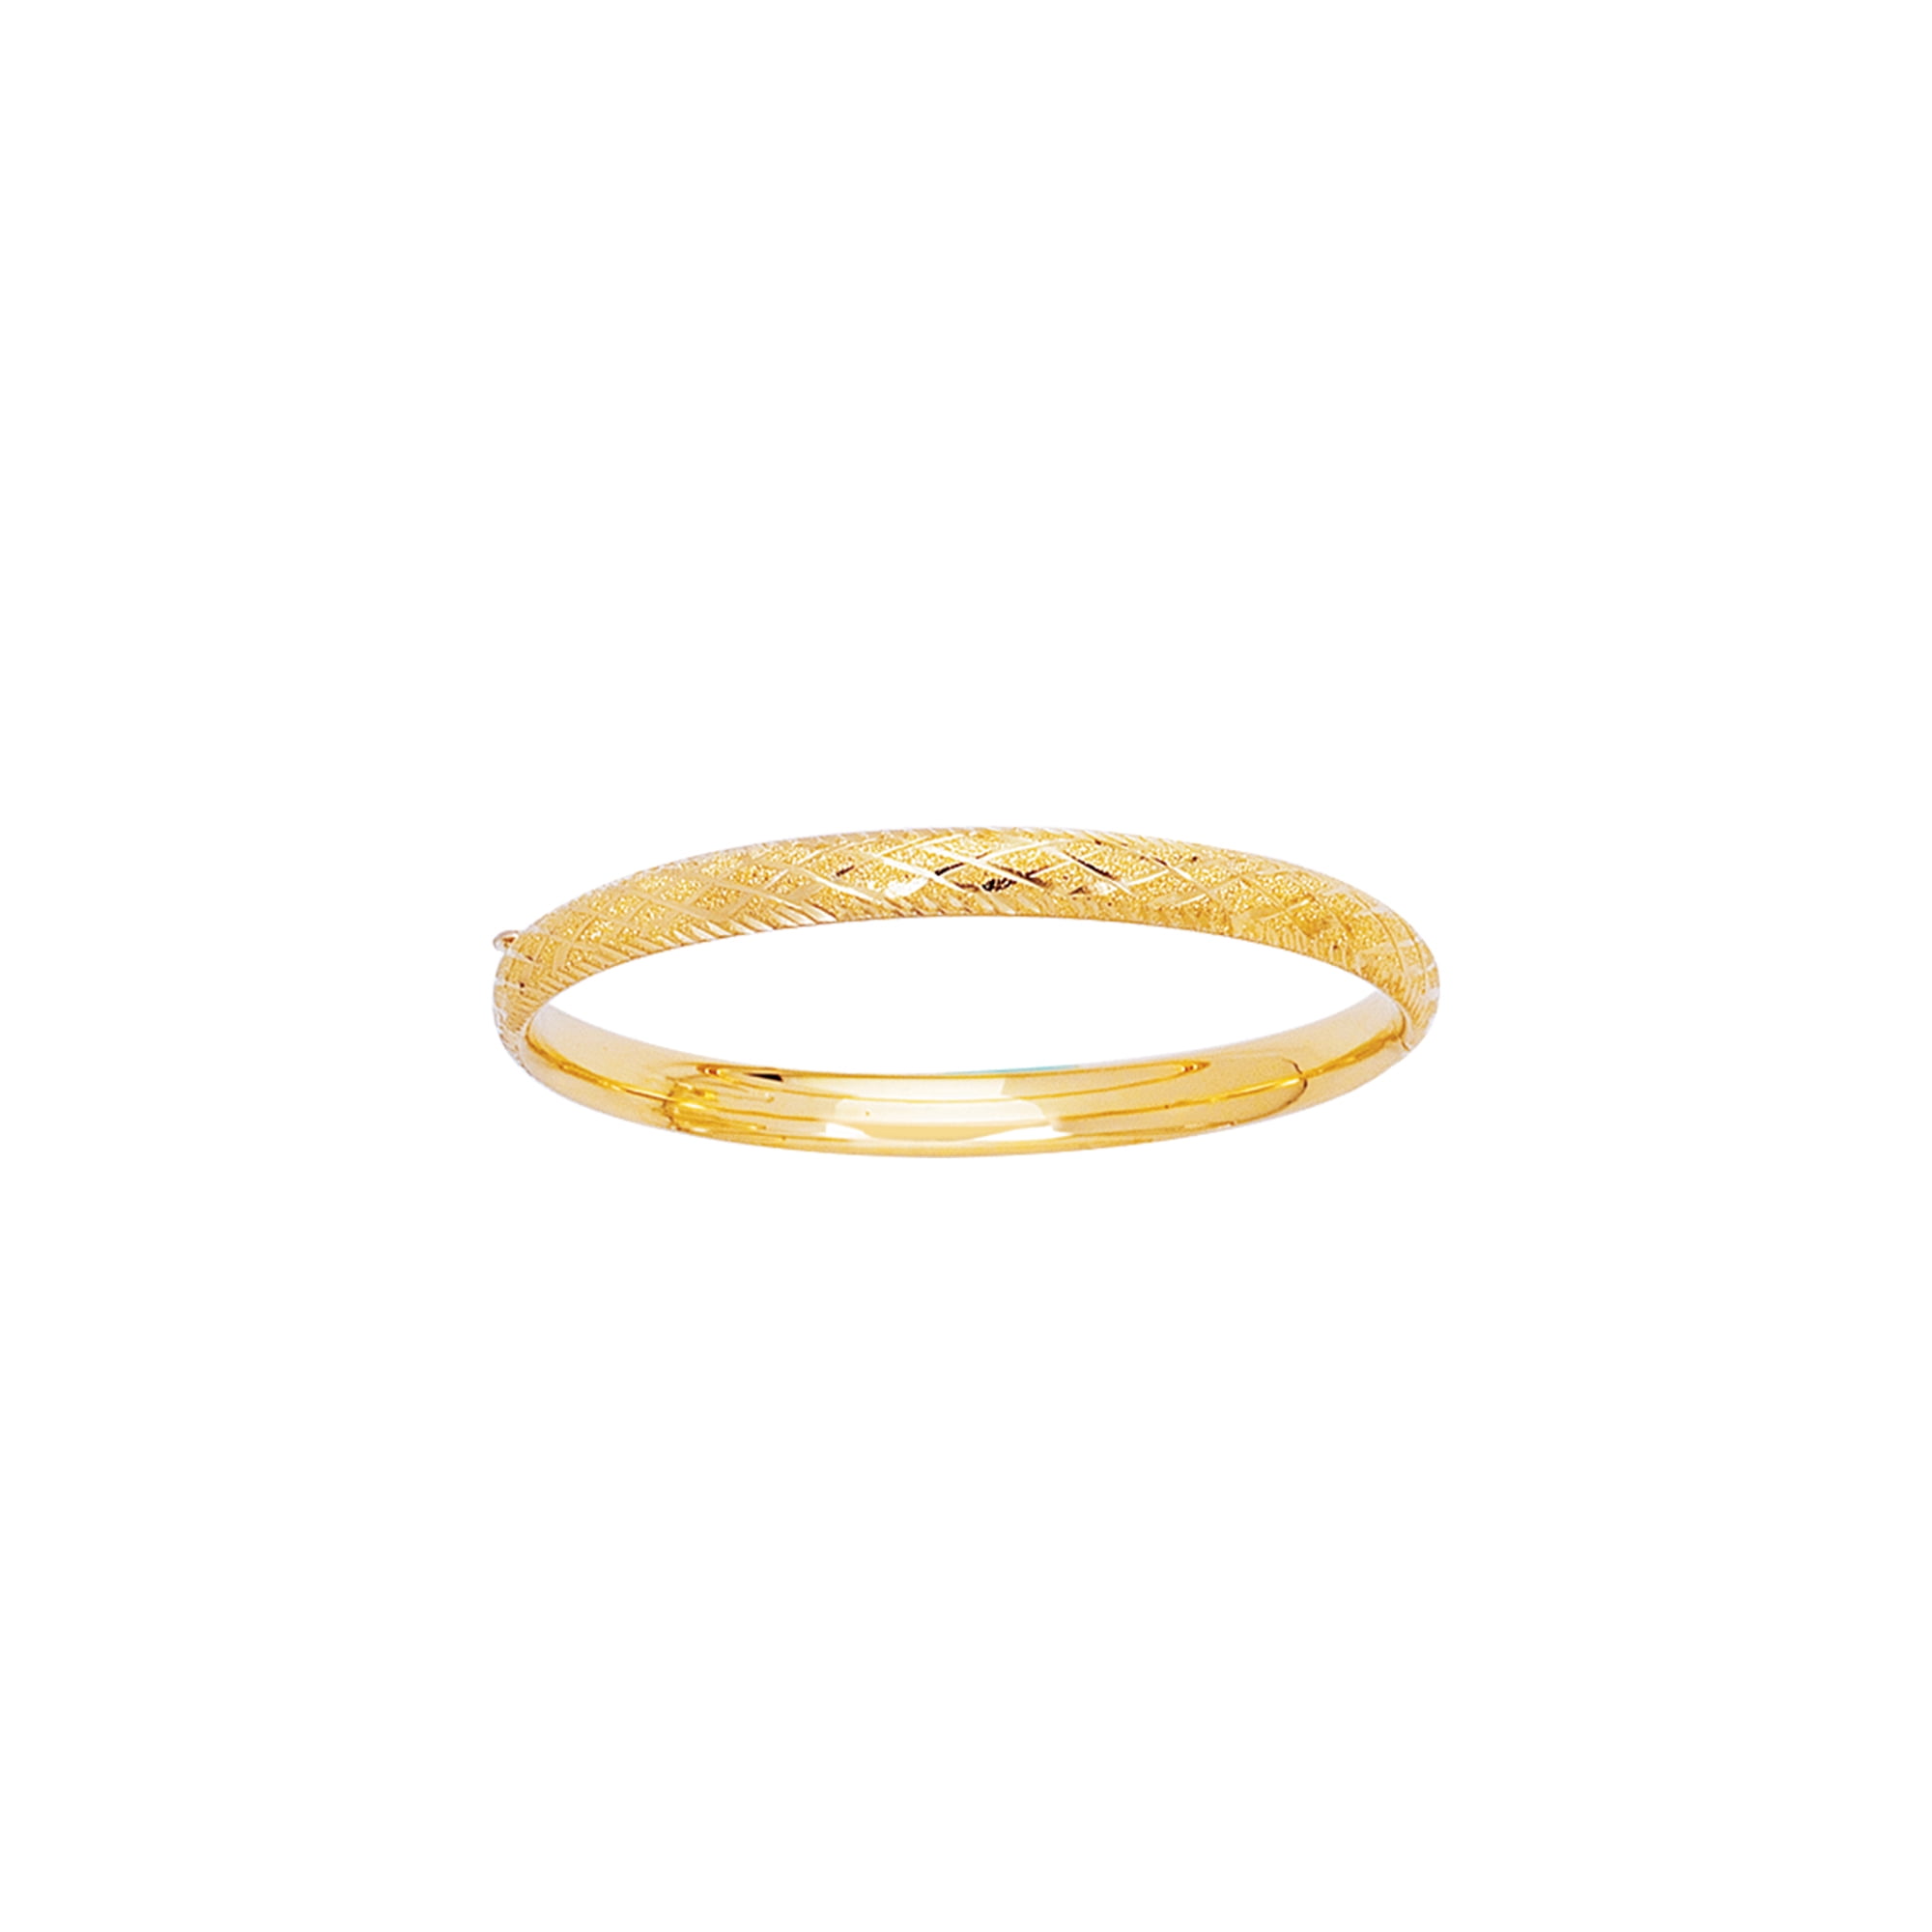 Double Accent 14K Yellow Gold Hollow DC Stackable 3mm Oval Shape Bangle Bracelet Available 7, 7.5 Inches